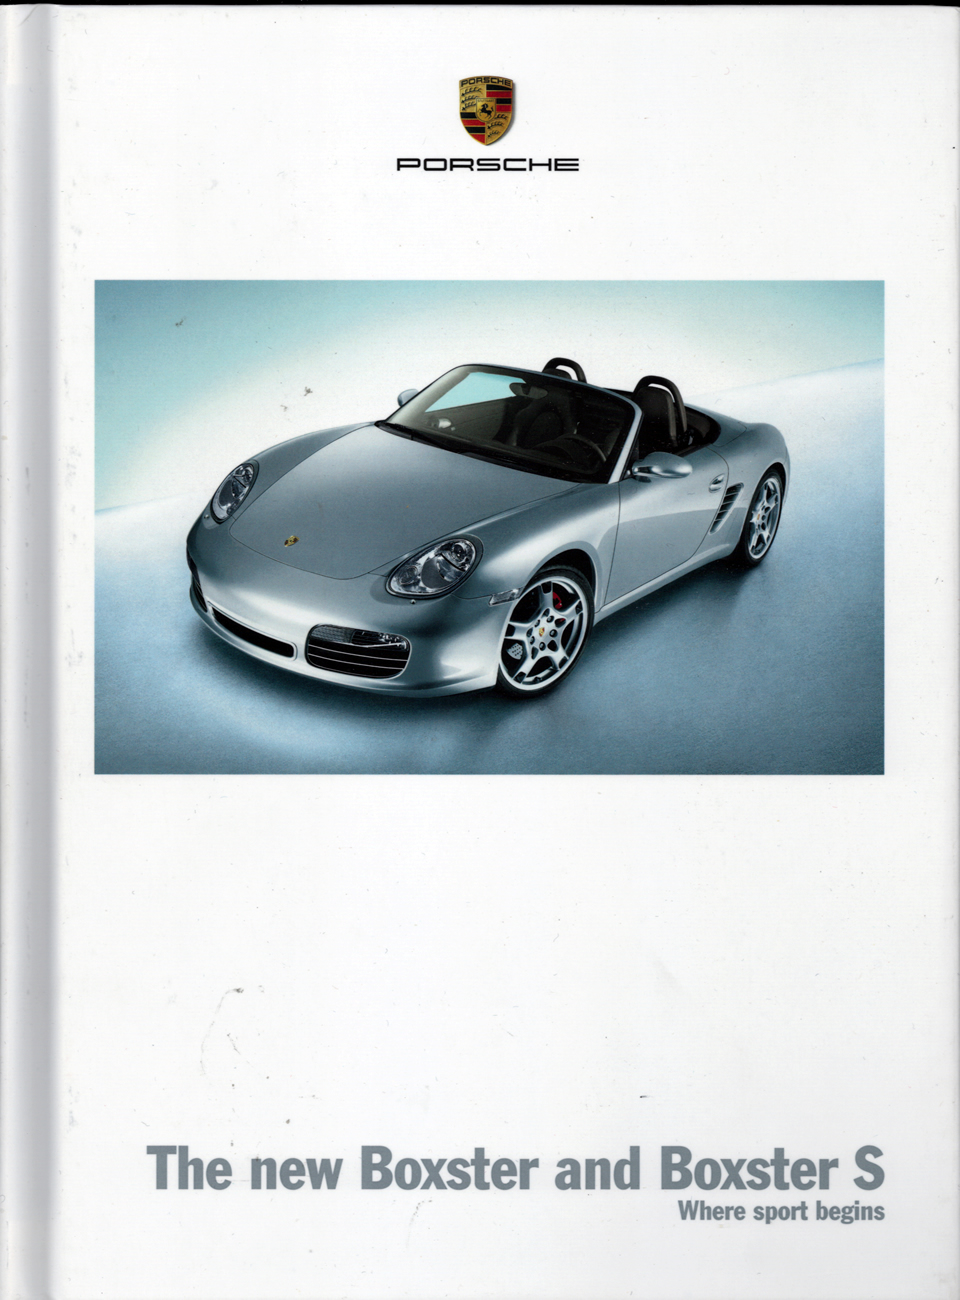 PO 021 The new Boxster and Boxster S